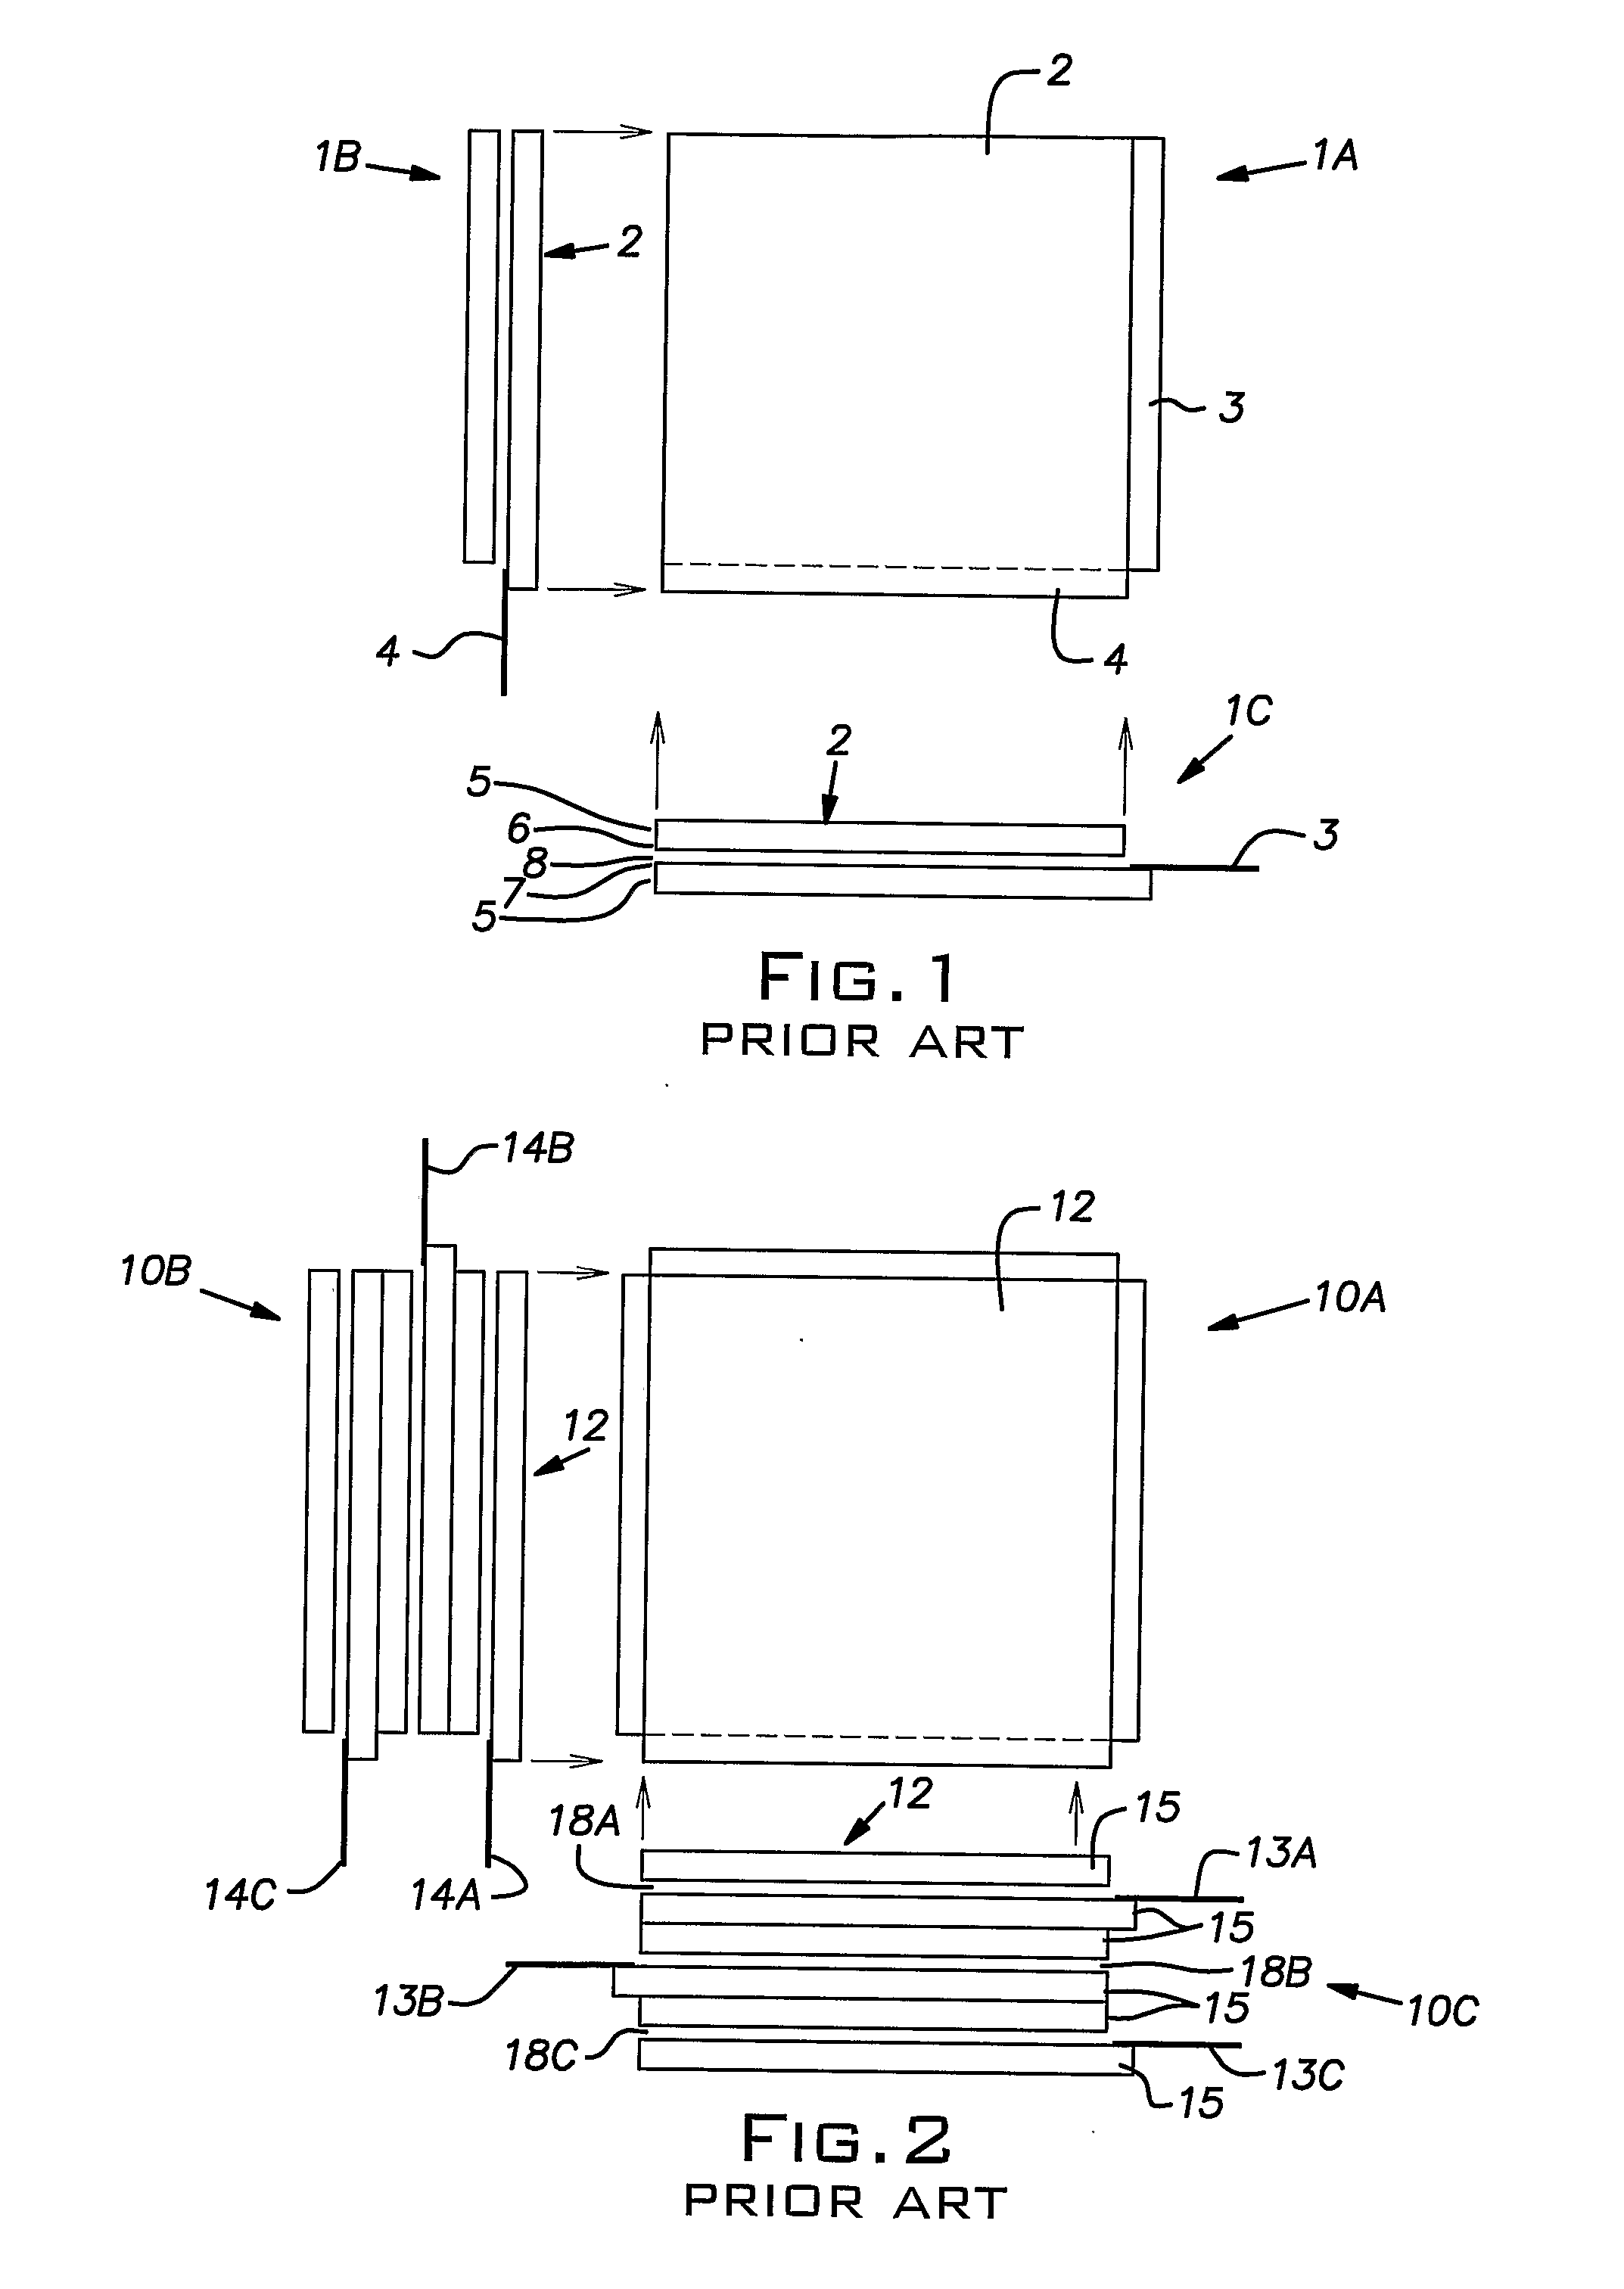 Stacked display with shared electrode addressing